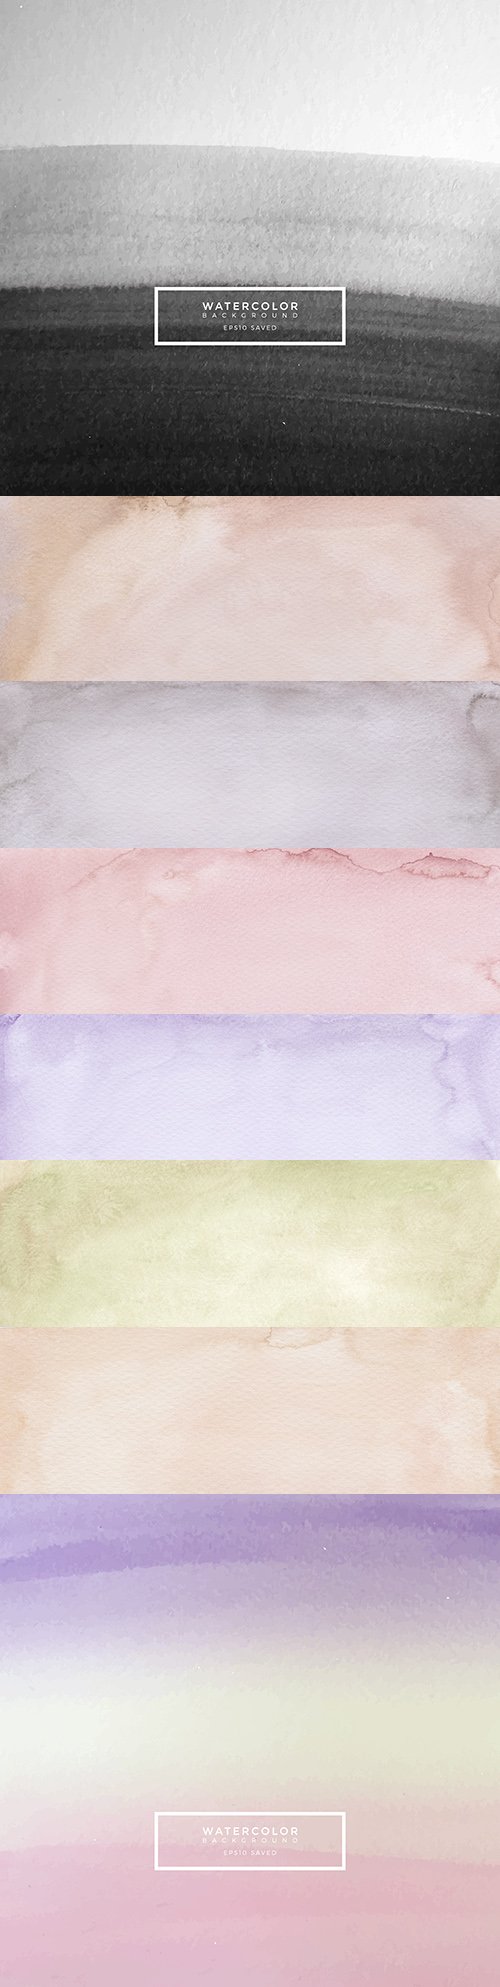 Watercolor texture background design soft colored